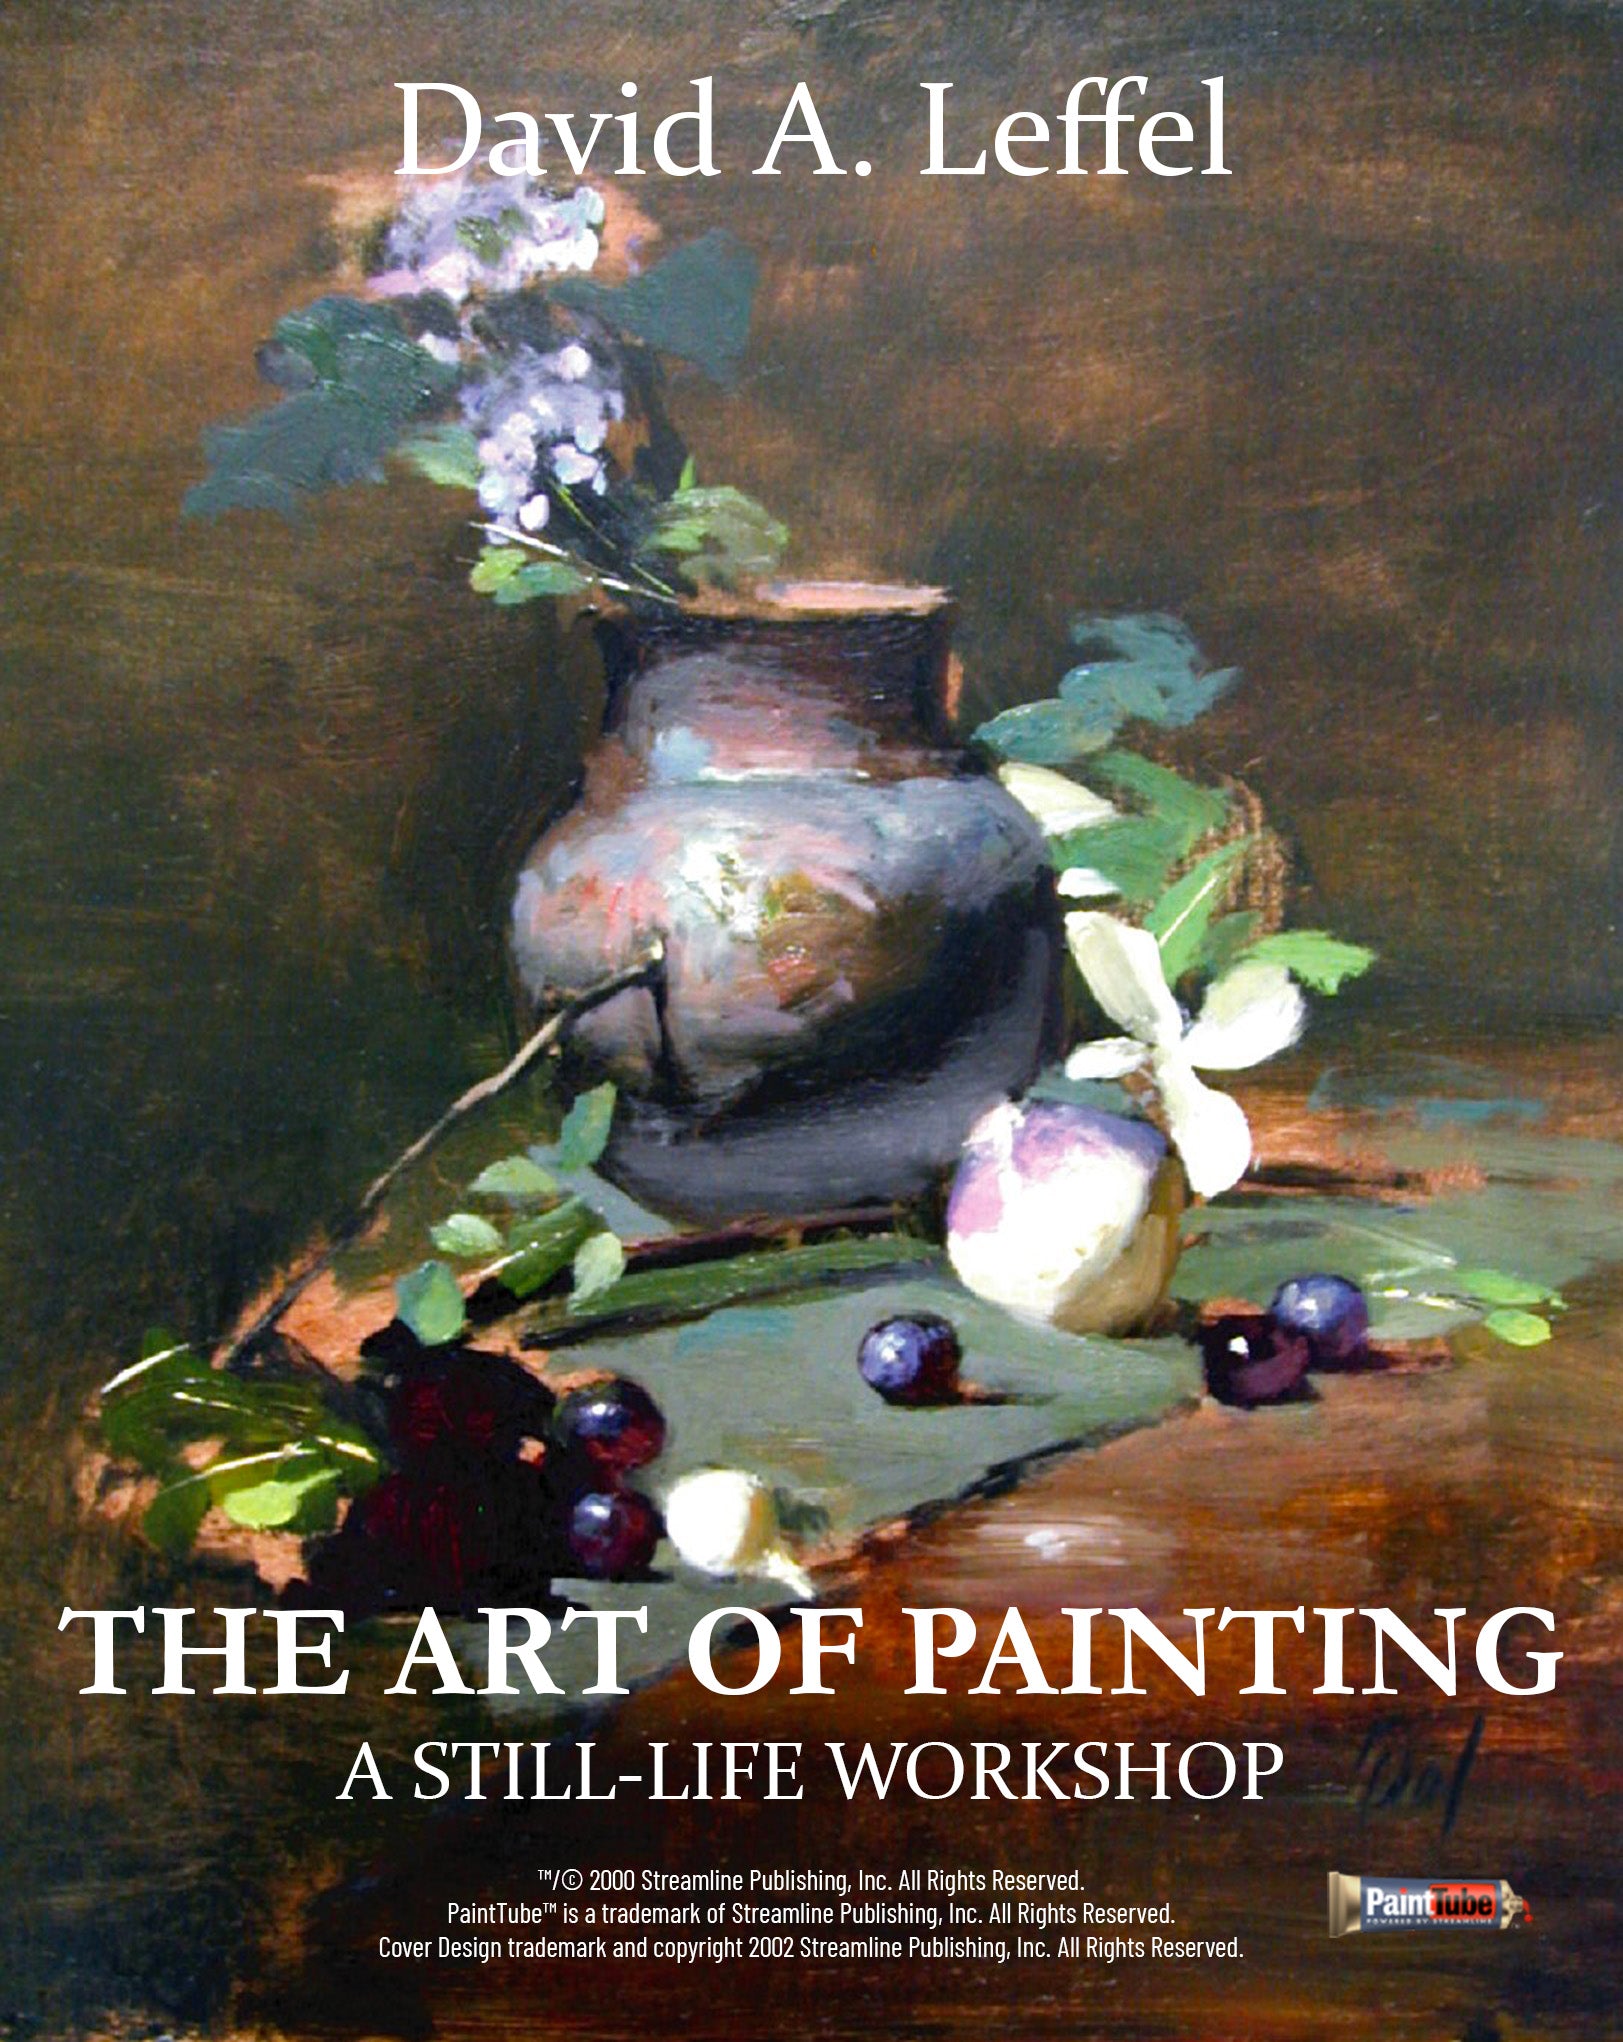 David A. Leffel: The Art of Painting